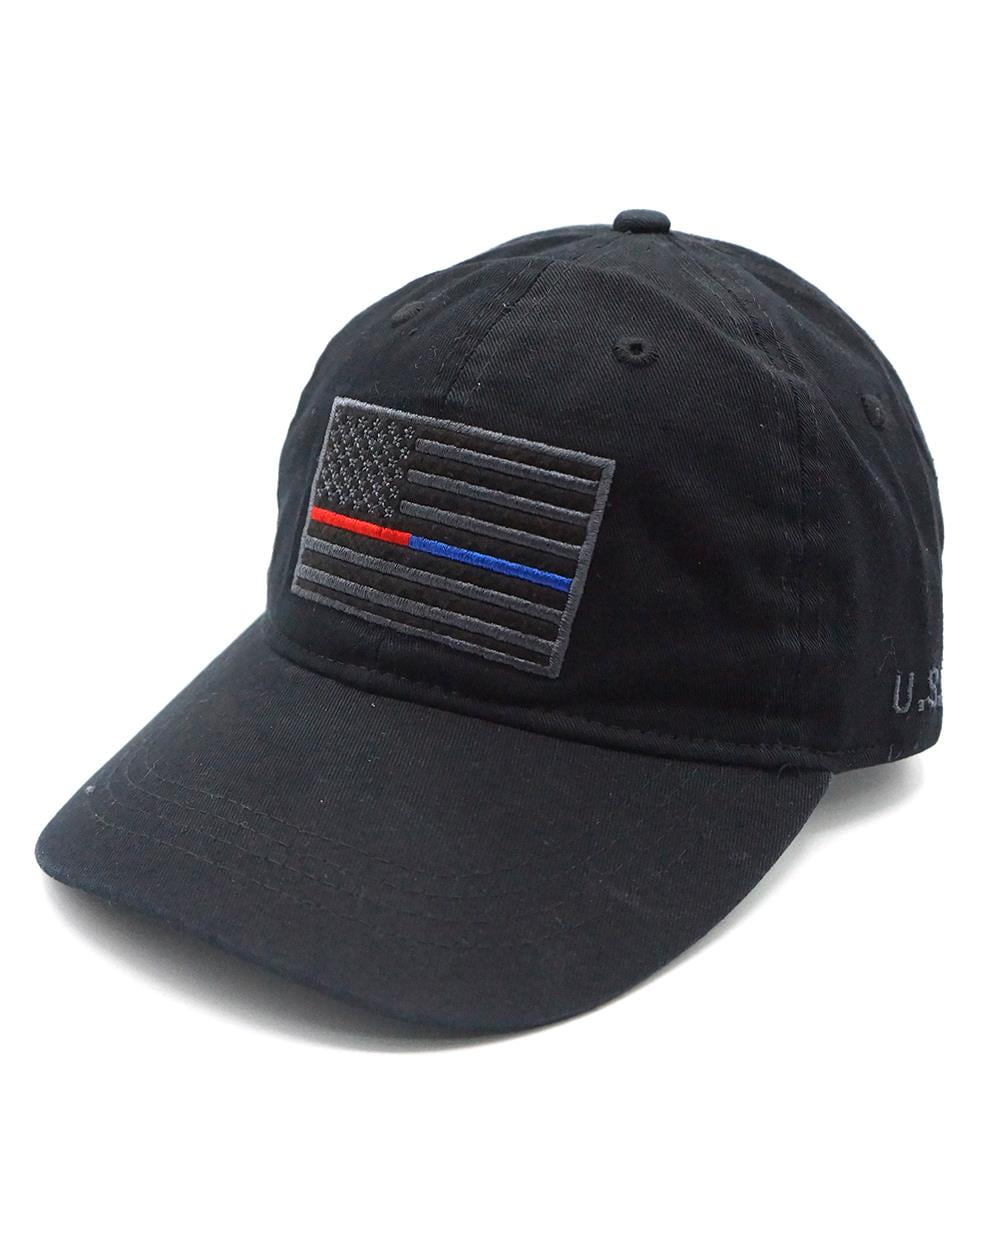 Embroidered Thin Red & Blue Line American Flag Baseball Cap